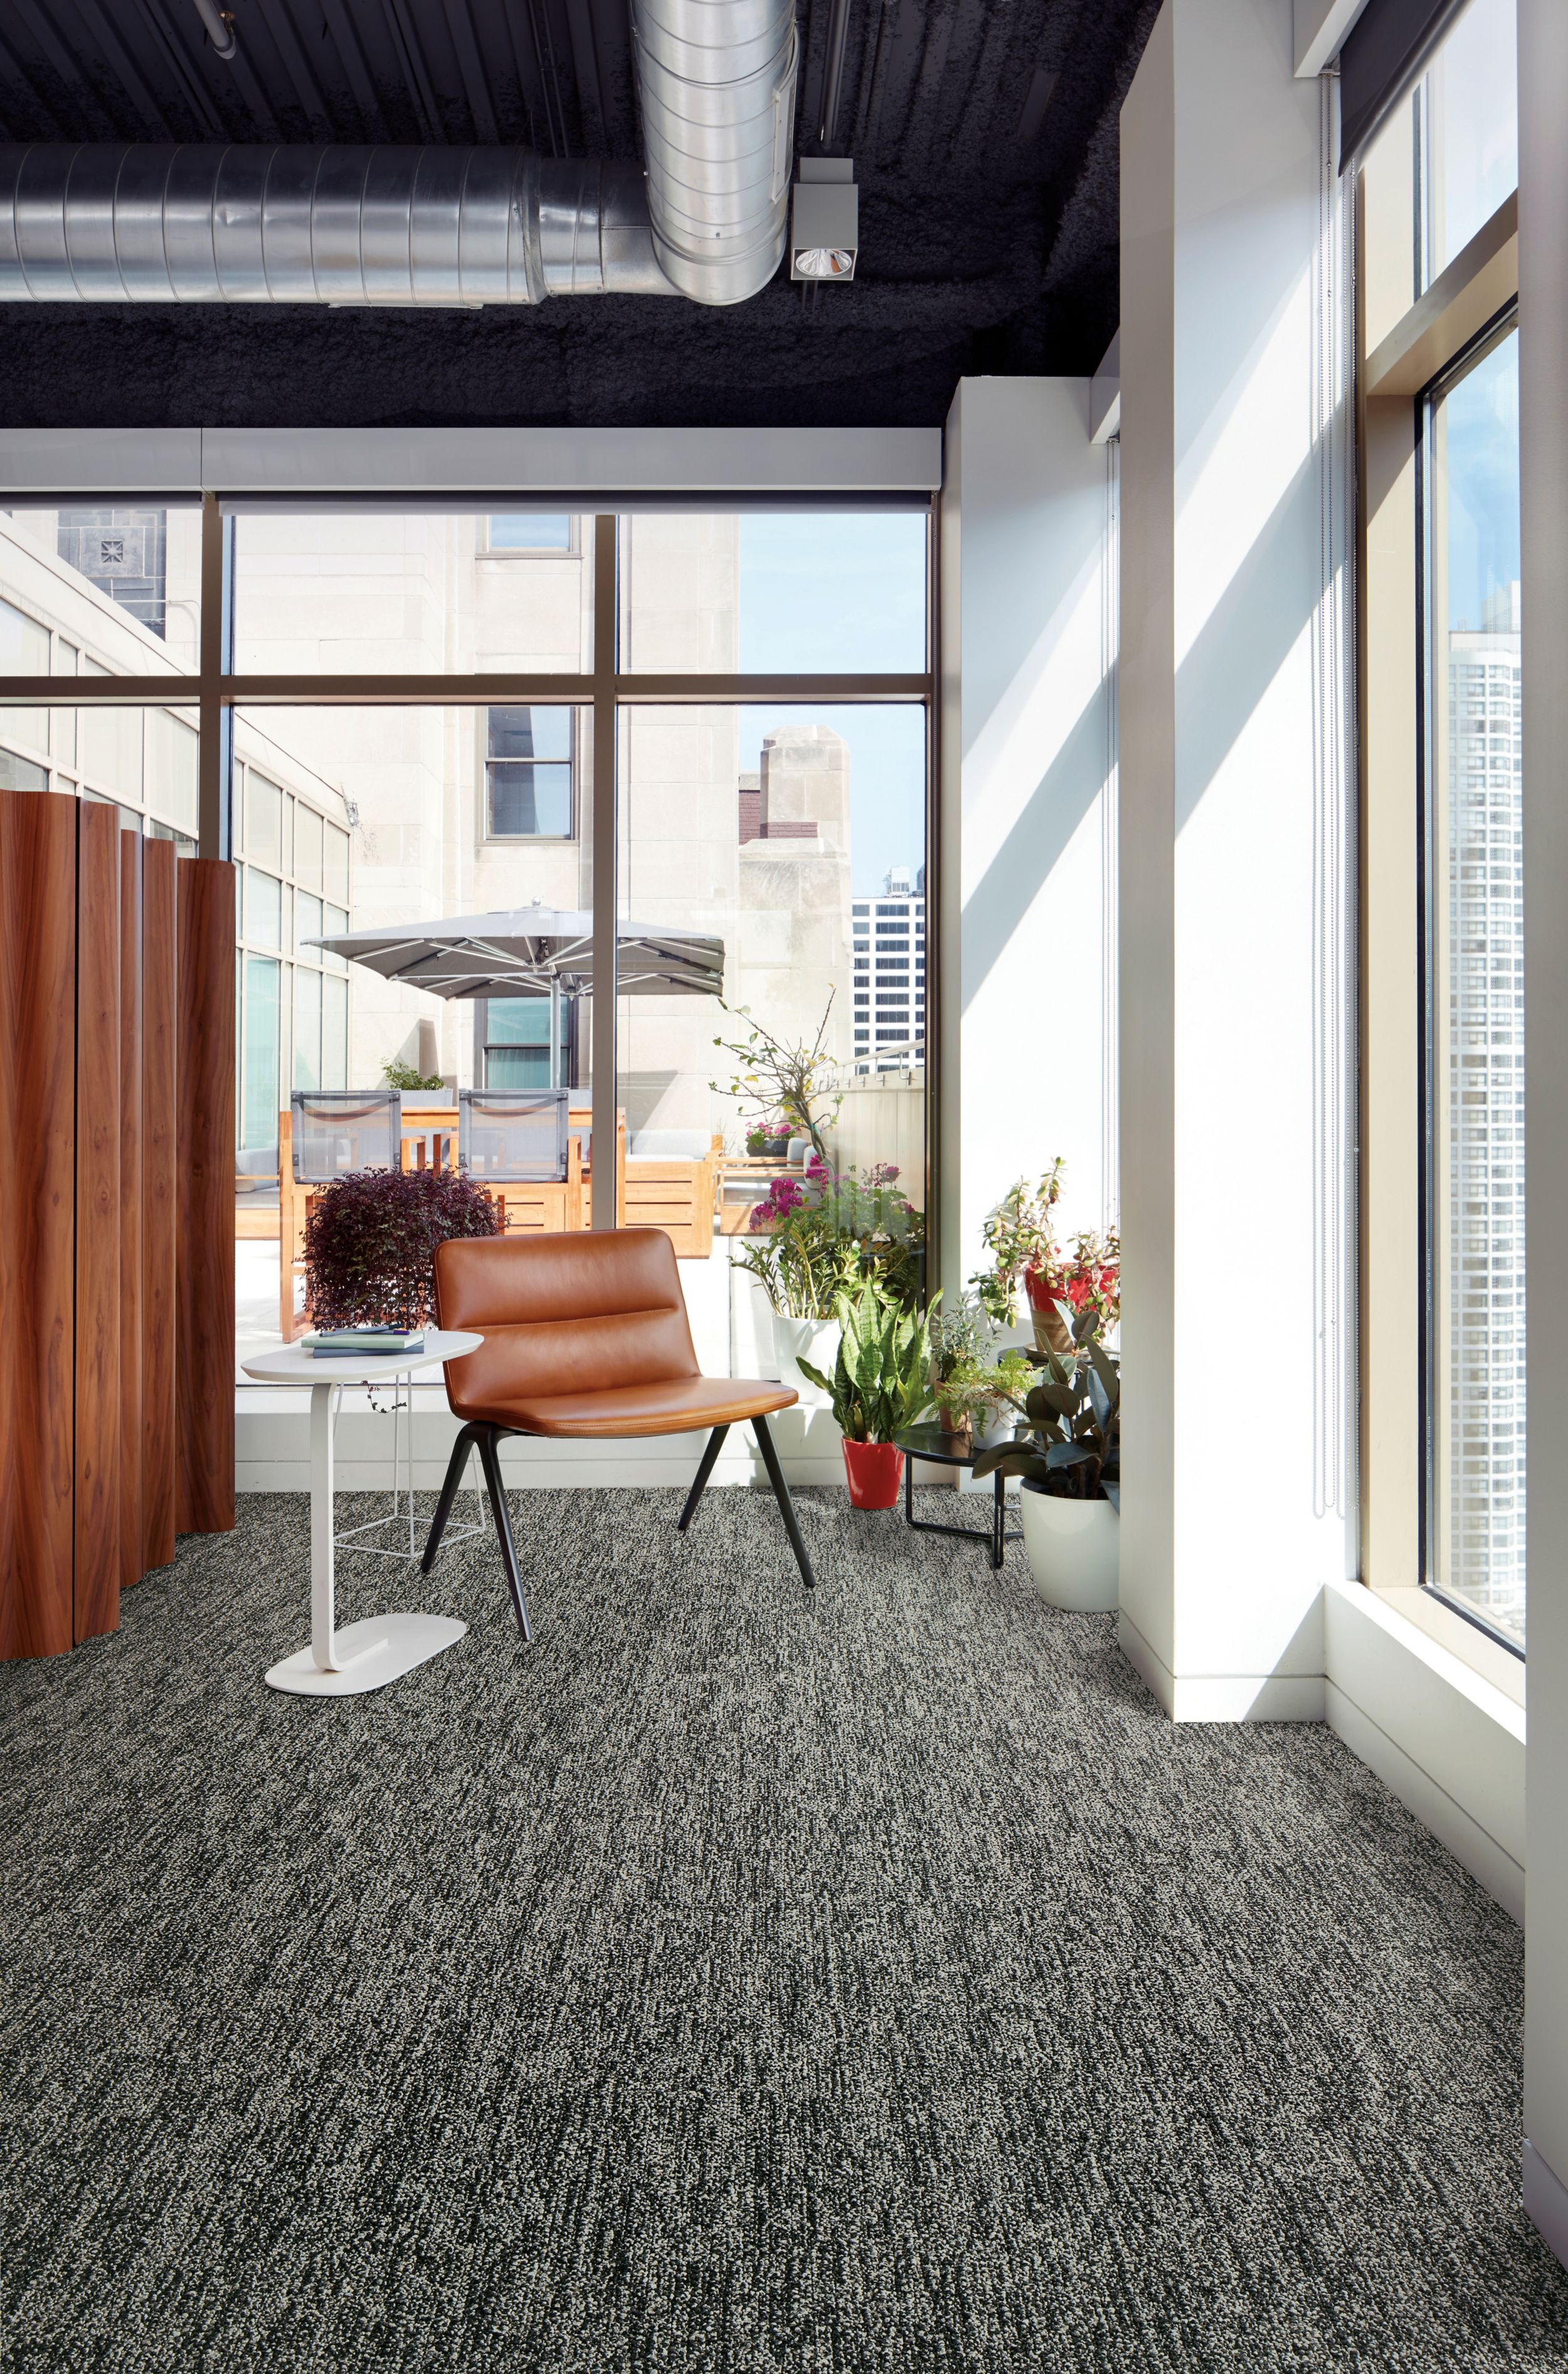 Interface Obligato plank carpet tile with leather chair and potted plants in windows image number 5